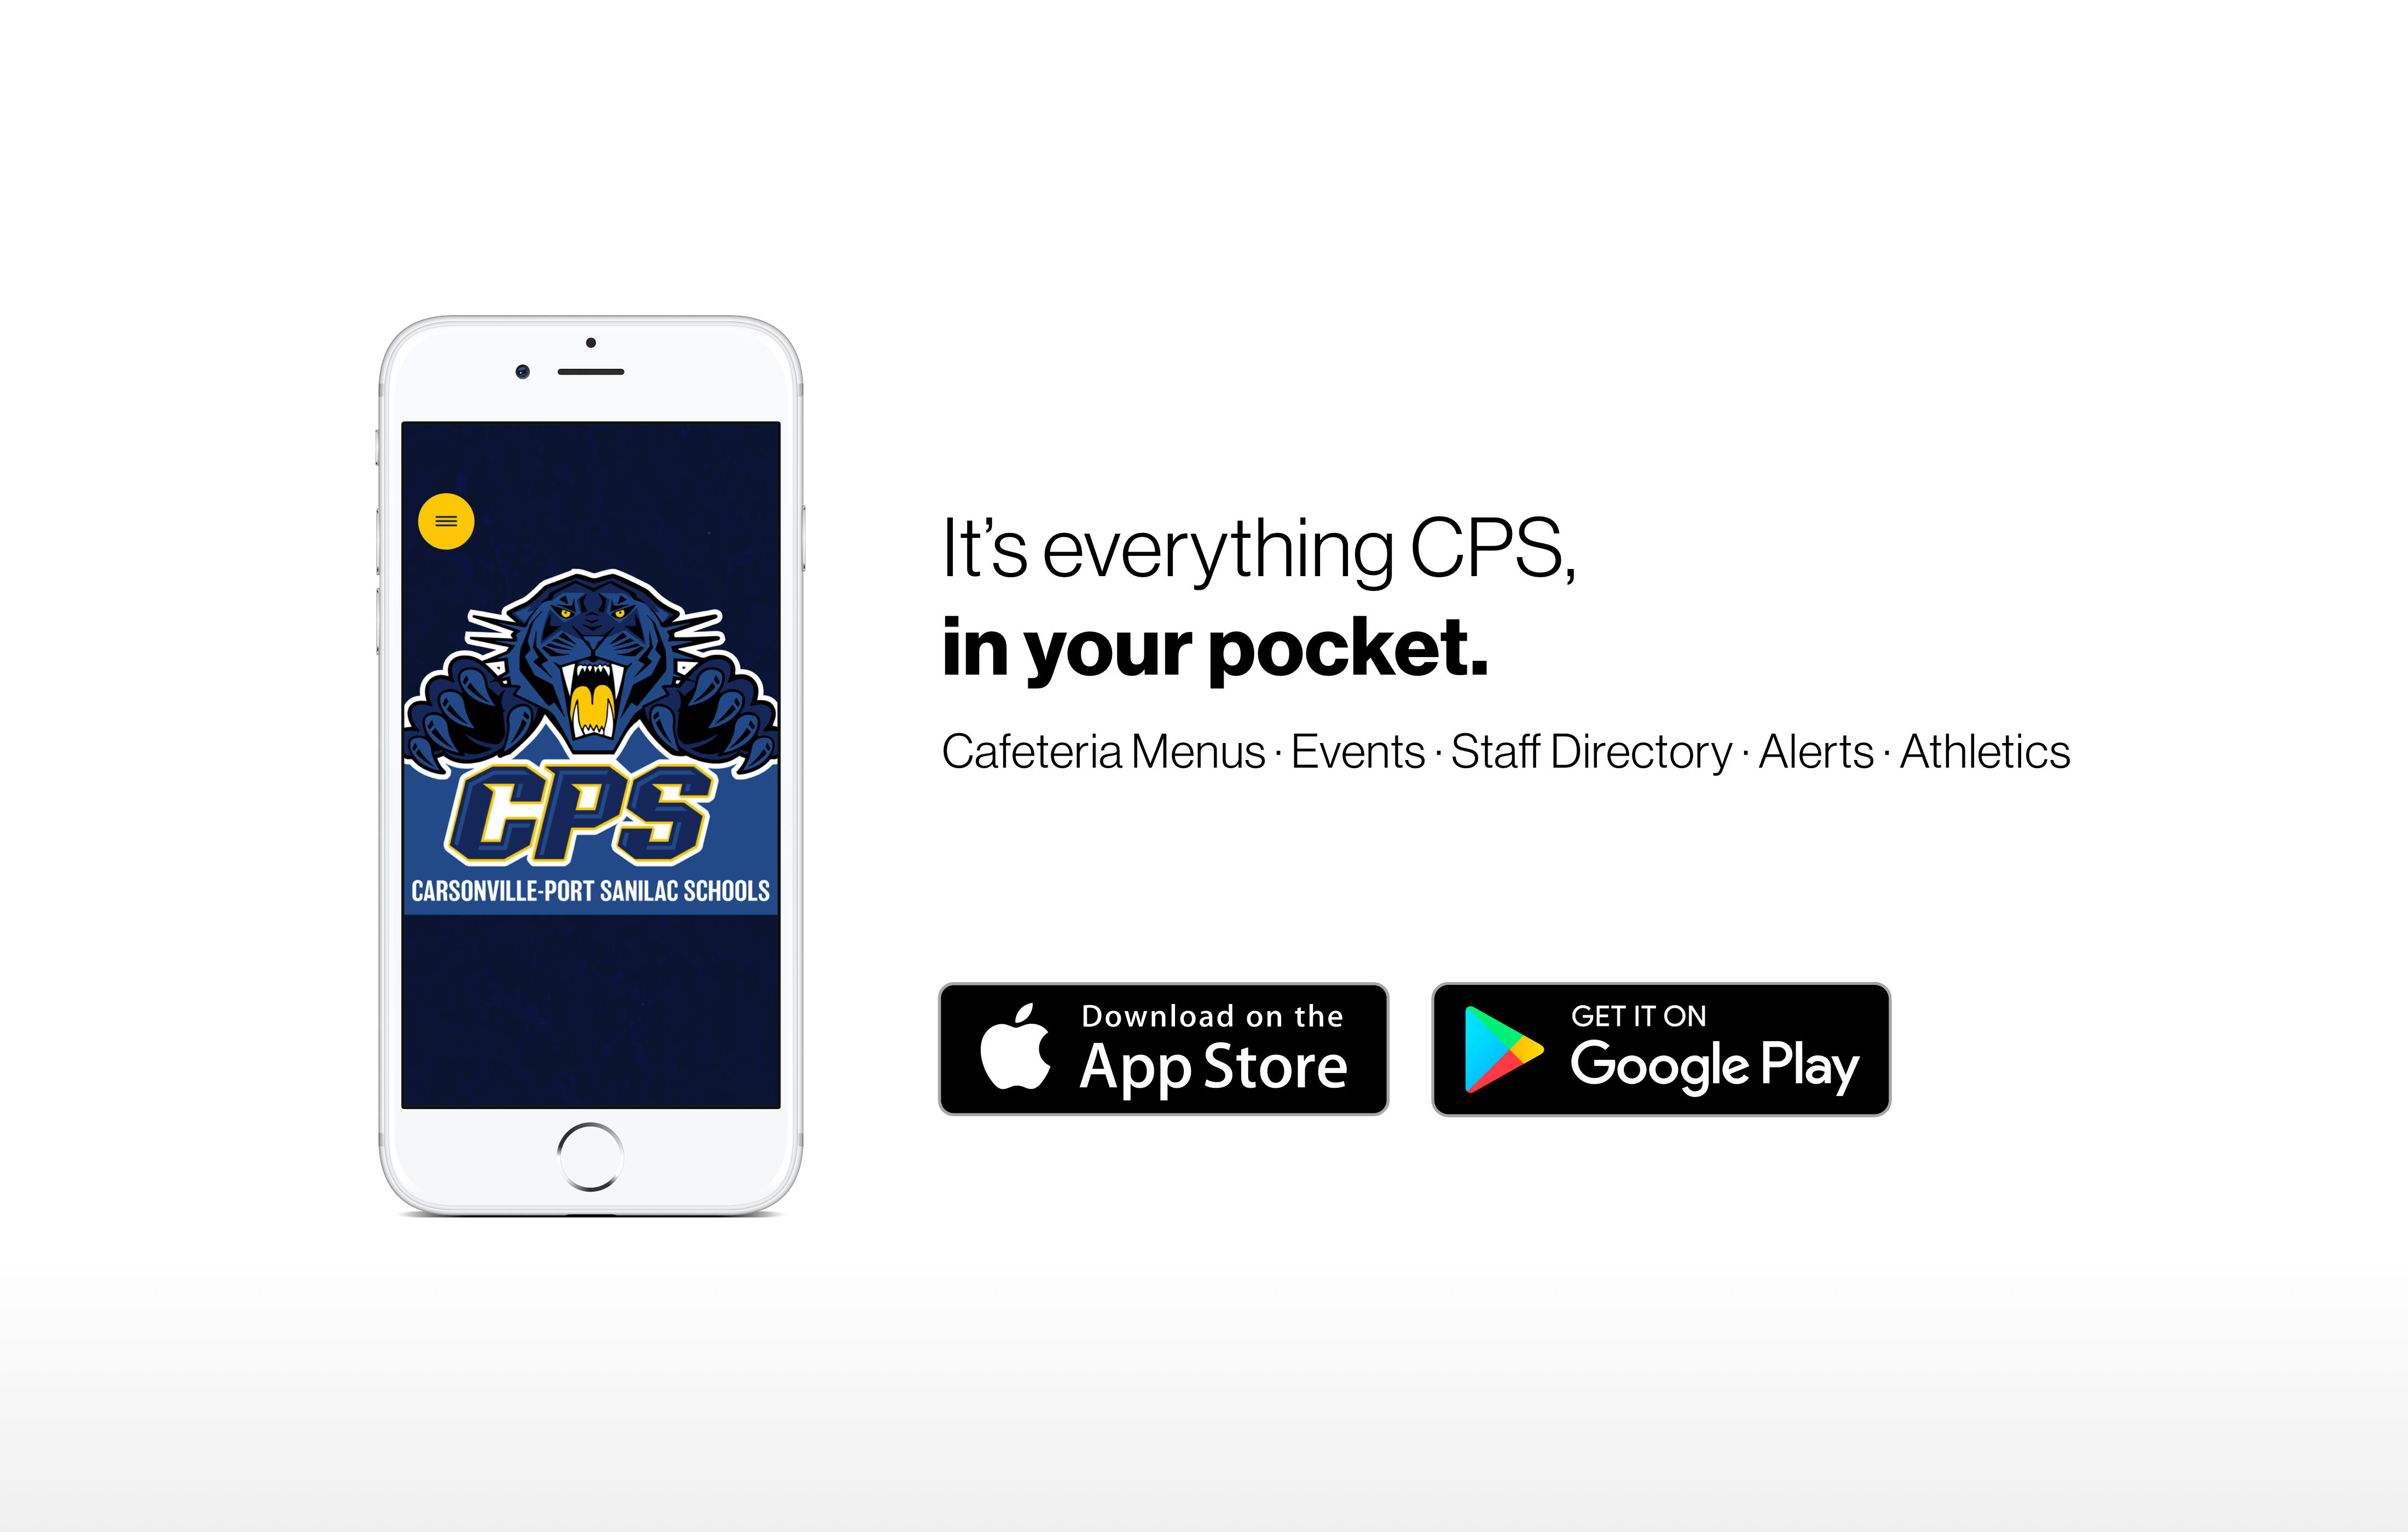 Download our new app on Apple and Android now!